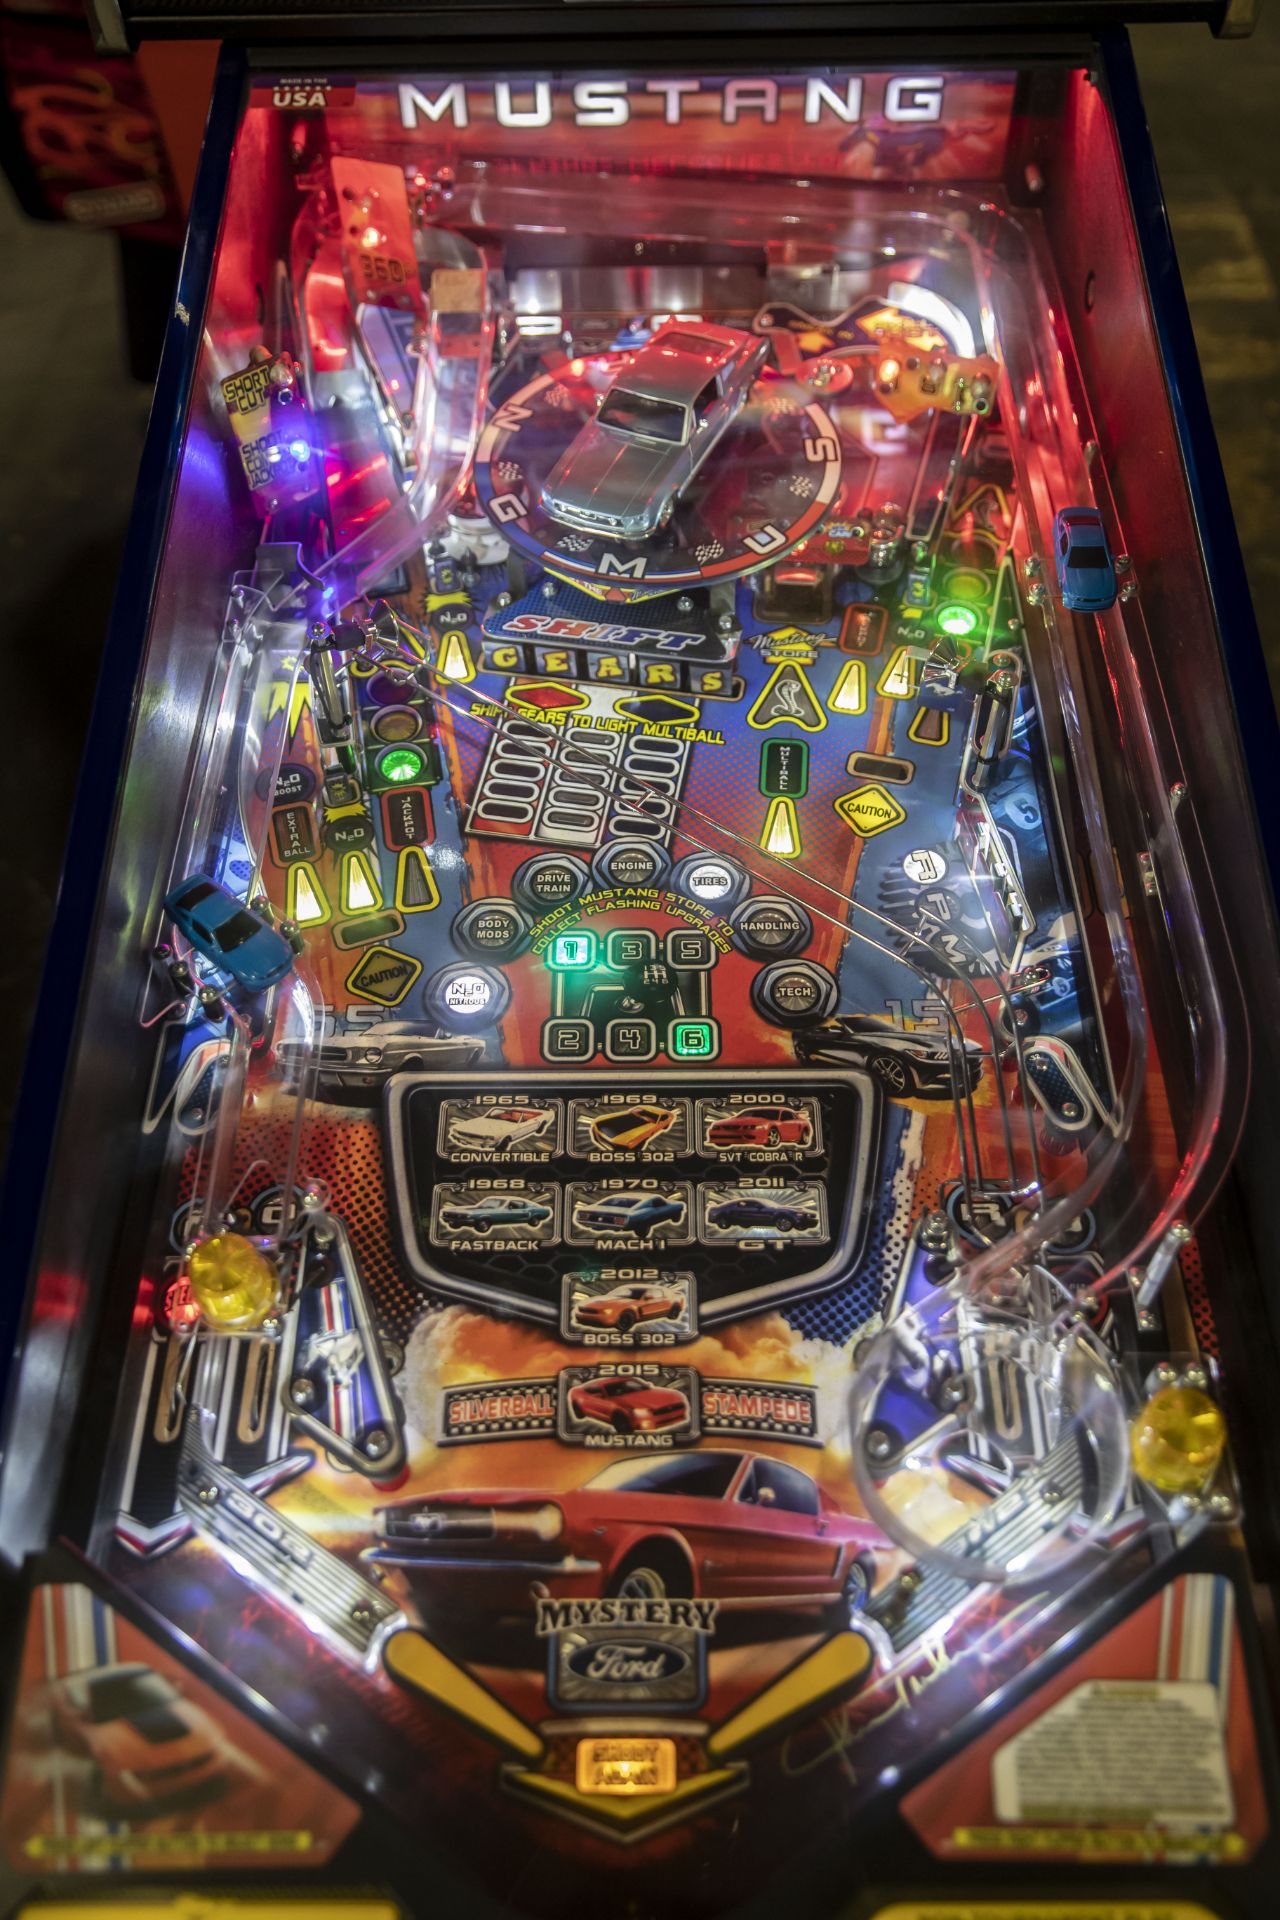 Limited Edition #12 Stern Mustang Pinball - Functional. Used, shows commercial use. See pictures. - Image 4 of 4